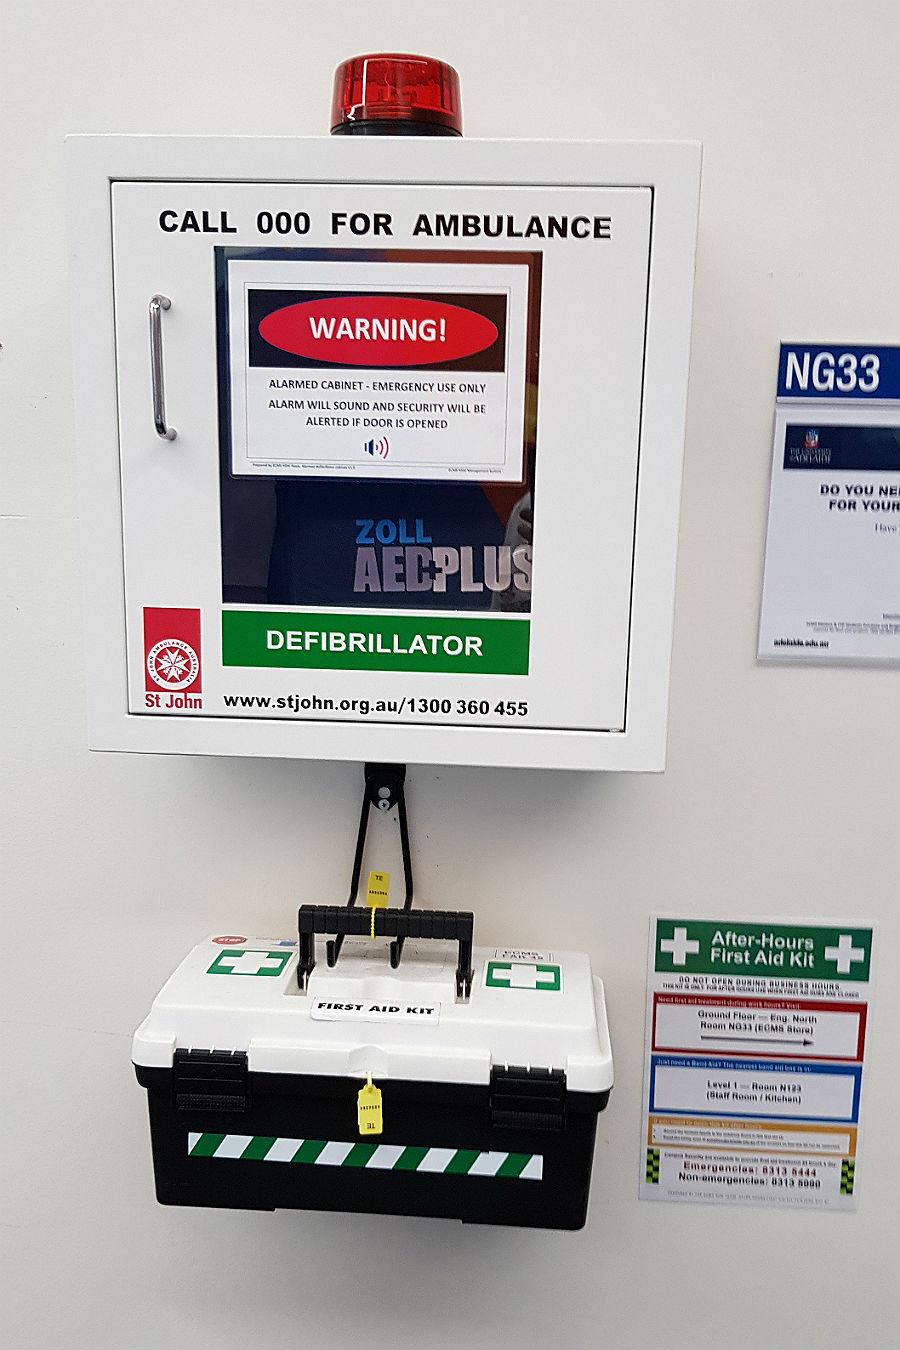 Picture shows a defibrillator machine and the first aid box